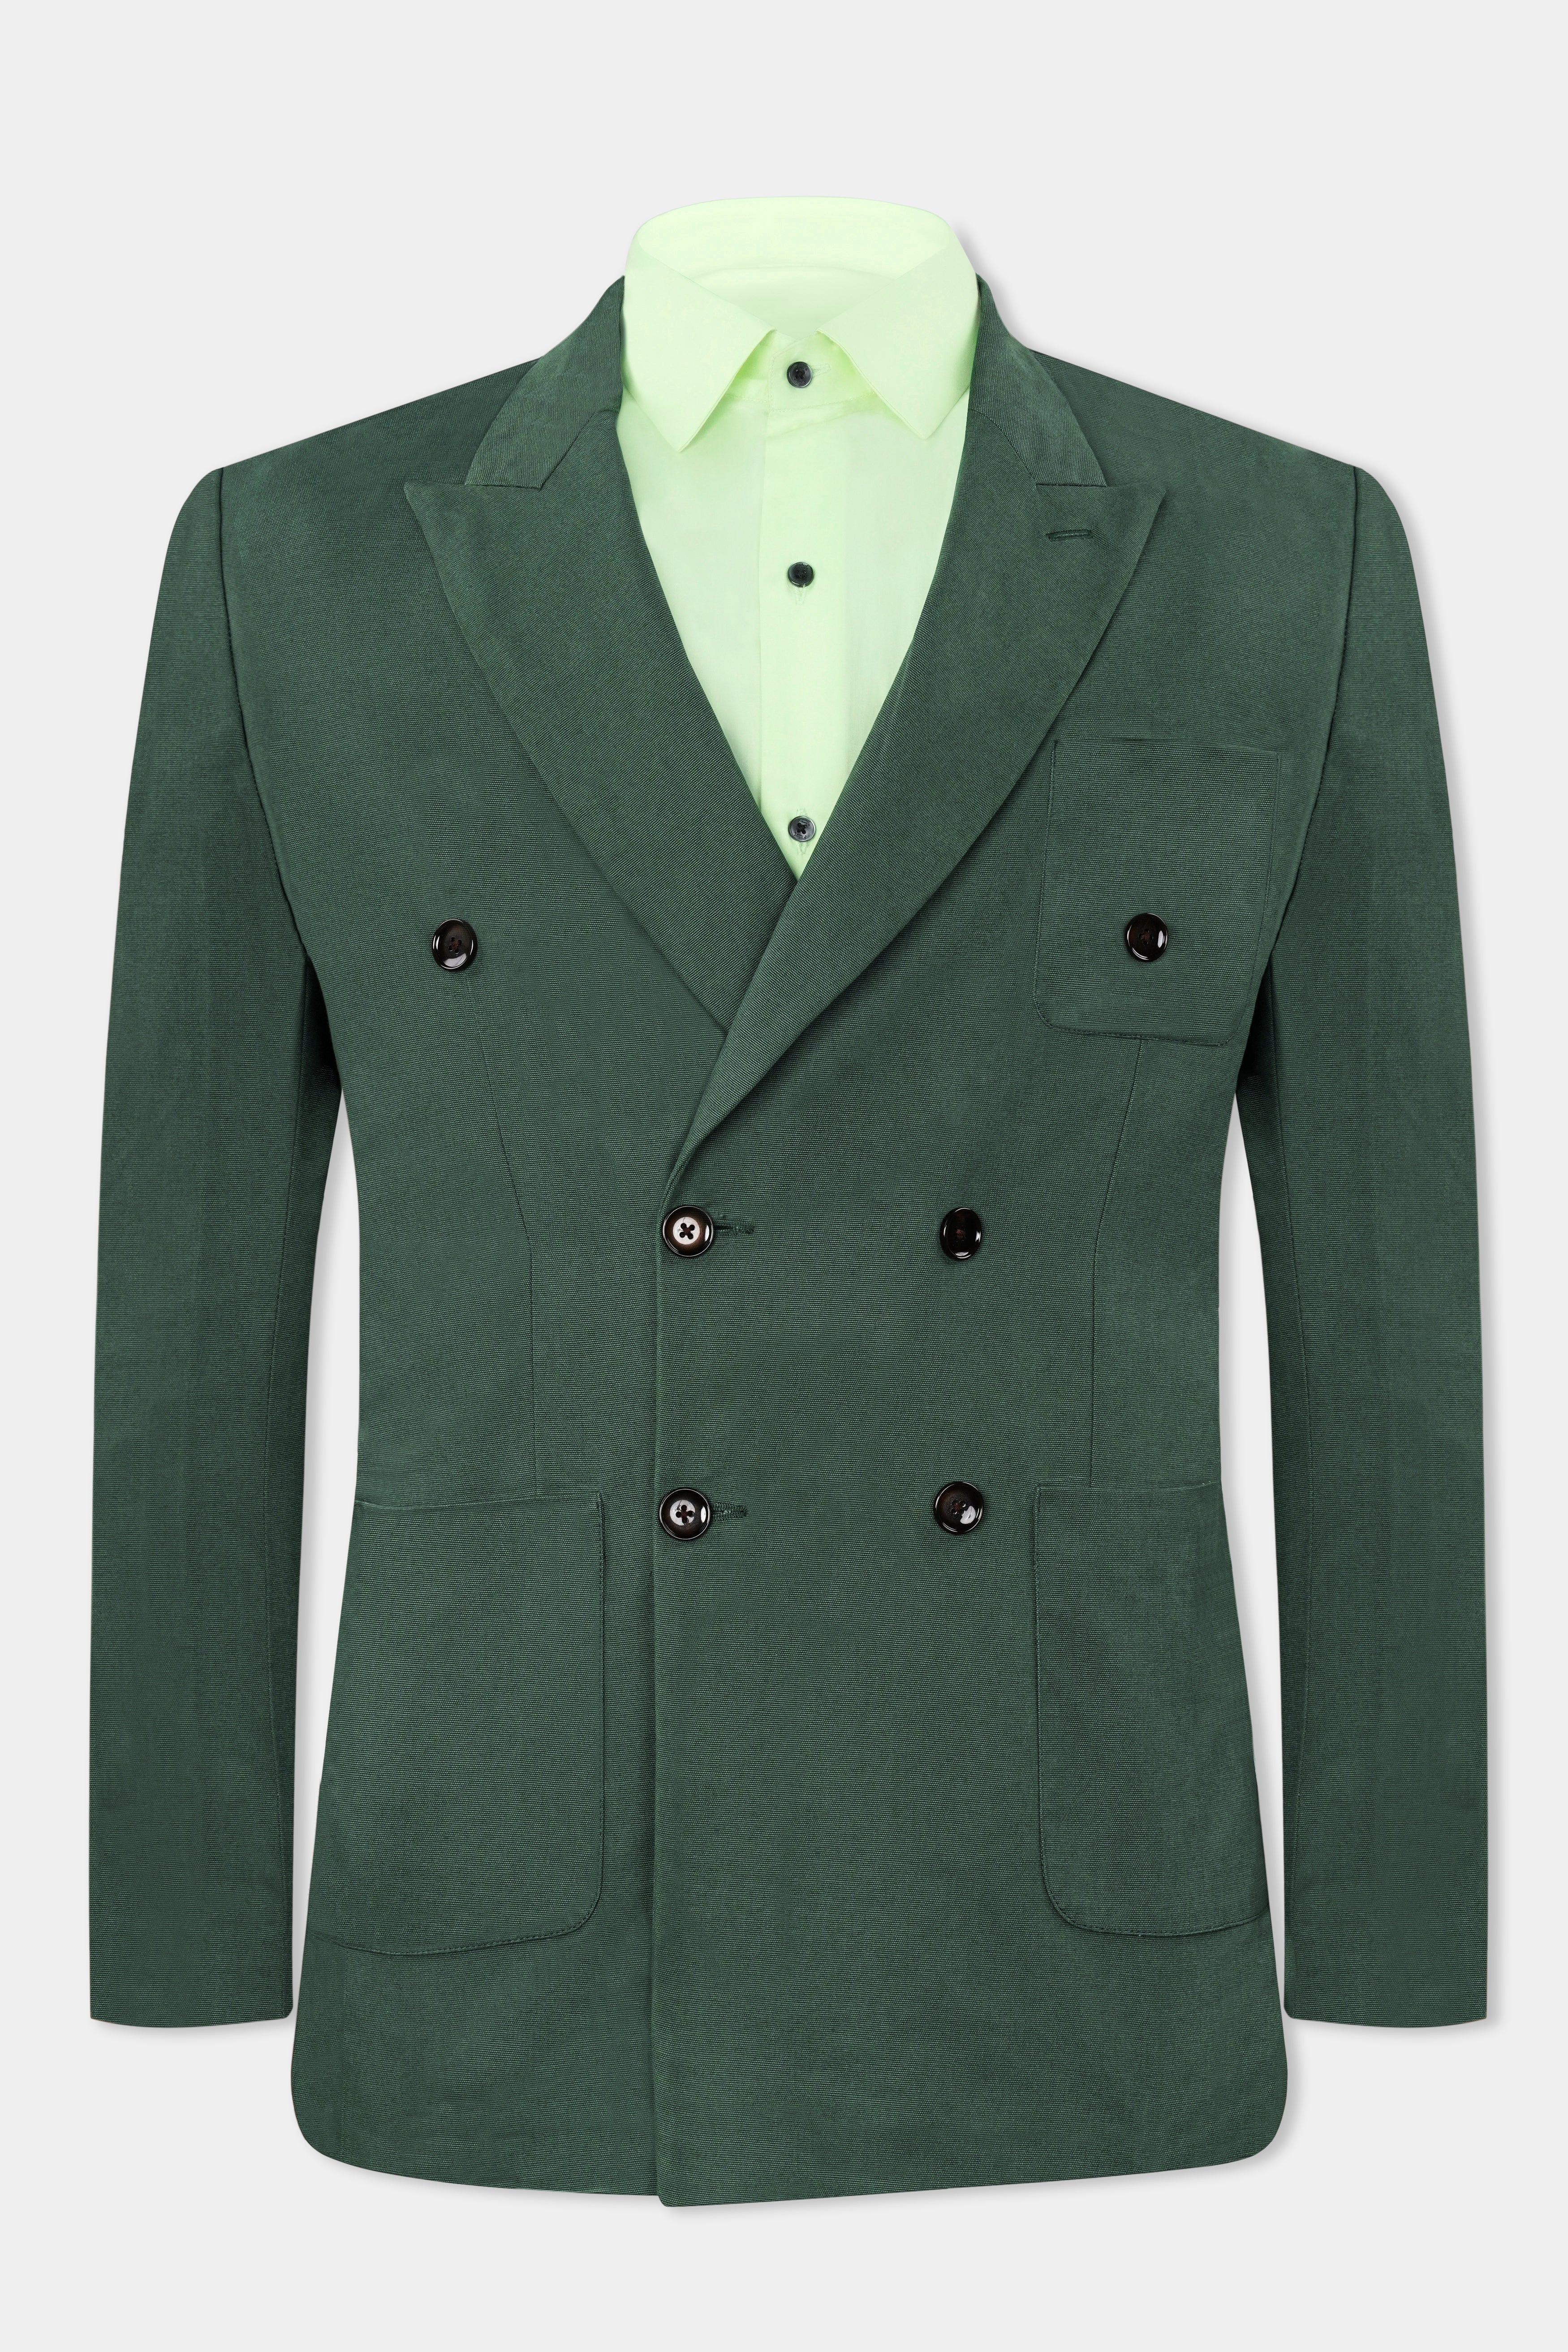 Fern Green Premium Cotton Double Breasted Blazer BL2970-DB-PP-36, BL2970-DB-PP-38, BL2970-DB-PP-40, BL2970-DB-PP-42, BL2970-DB-PP-44, BL2970-DB-PP-46, BL2970-DB-PP-48, BL2970-DB-PP-50, BL2970-DB-PP-52, BL2970-DB-PP-54, BL2970-DB-PP-56, BL2970-DB-PP-58, BL2970-DB-PP-60